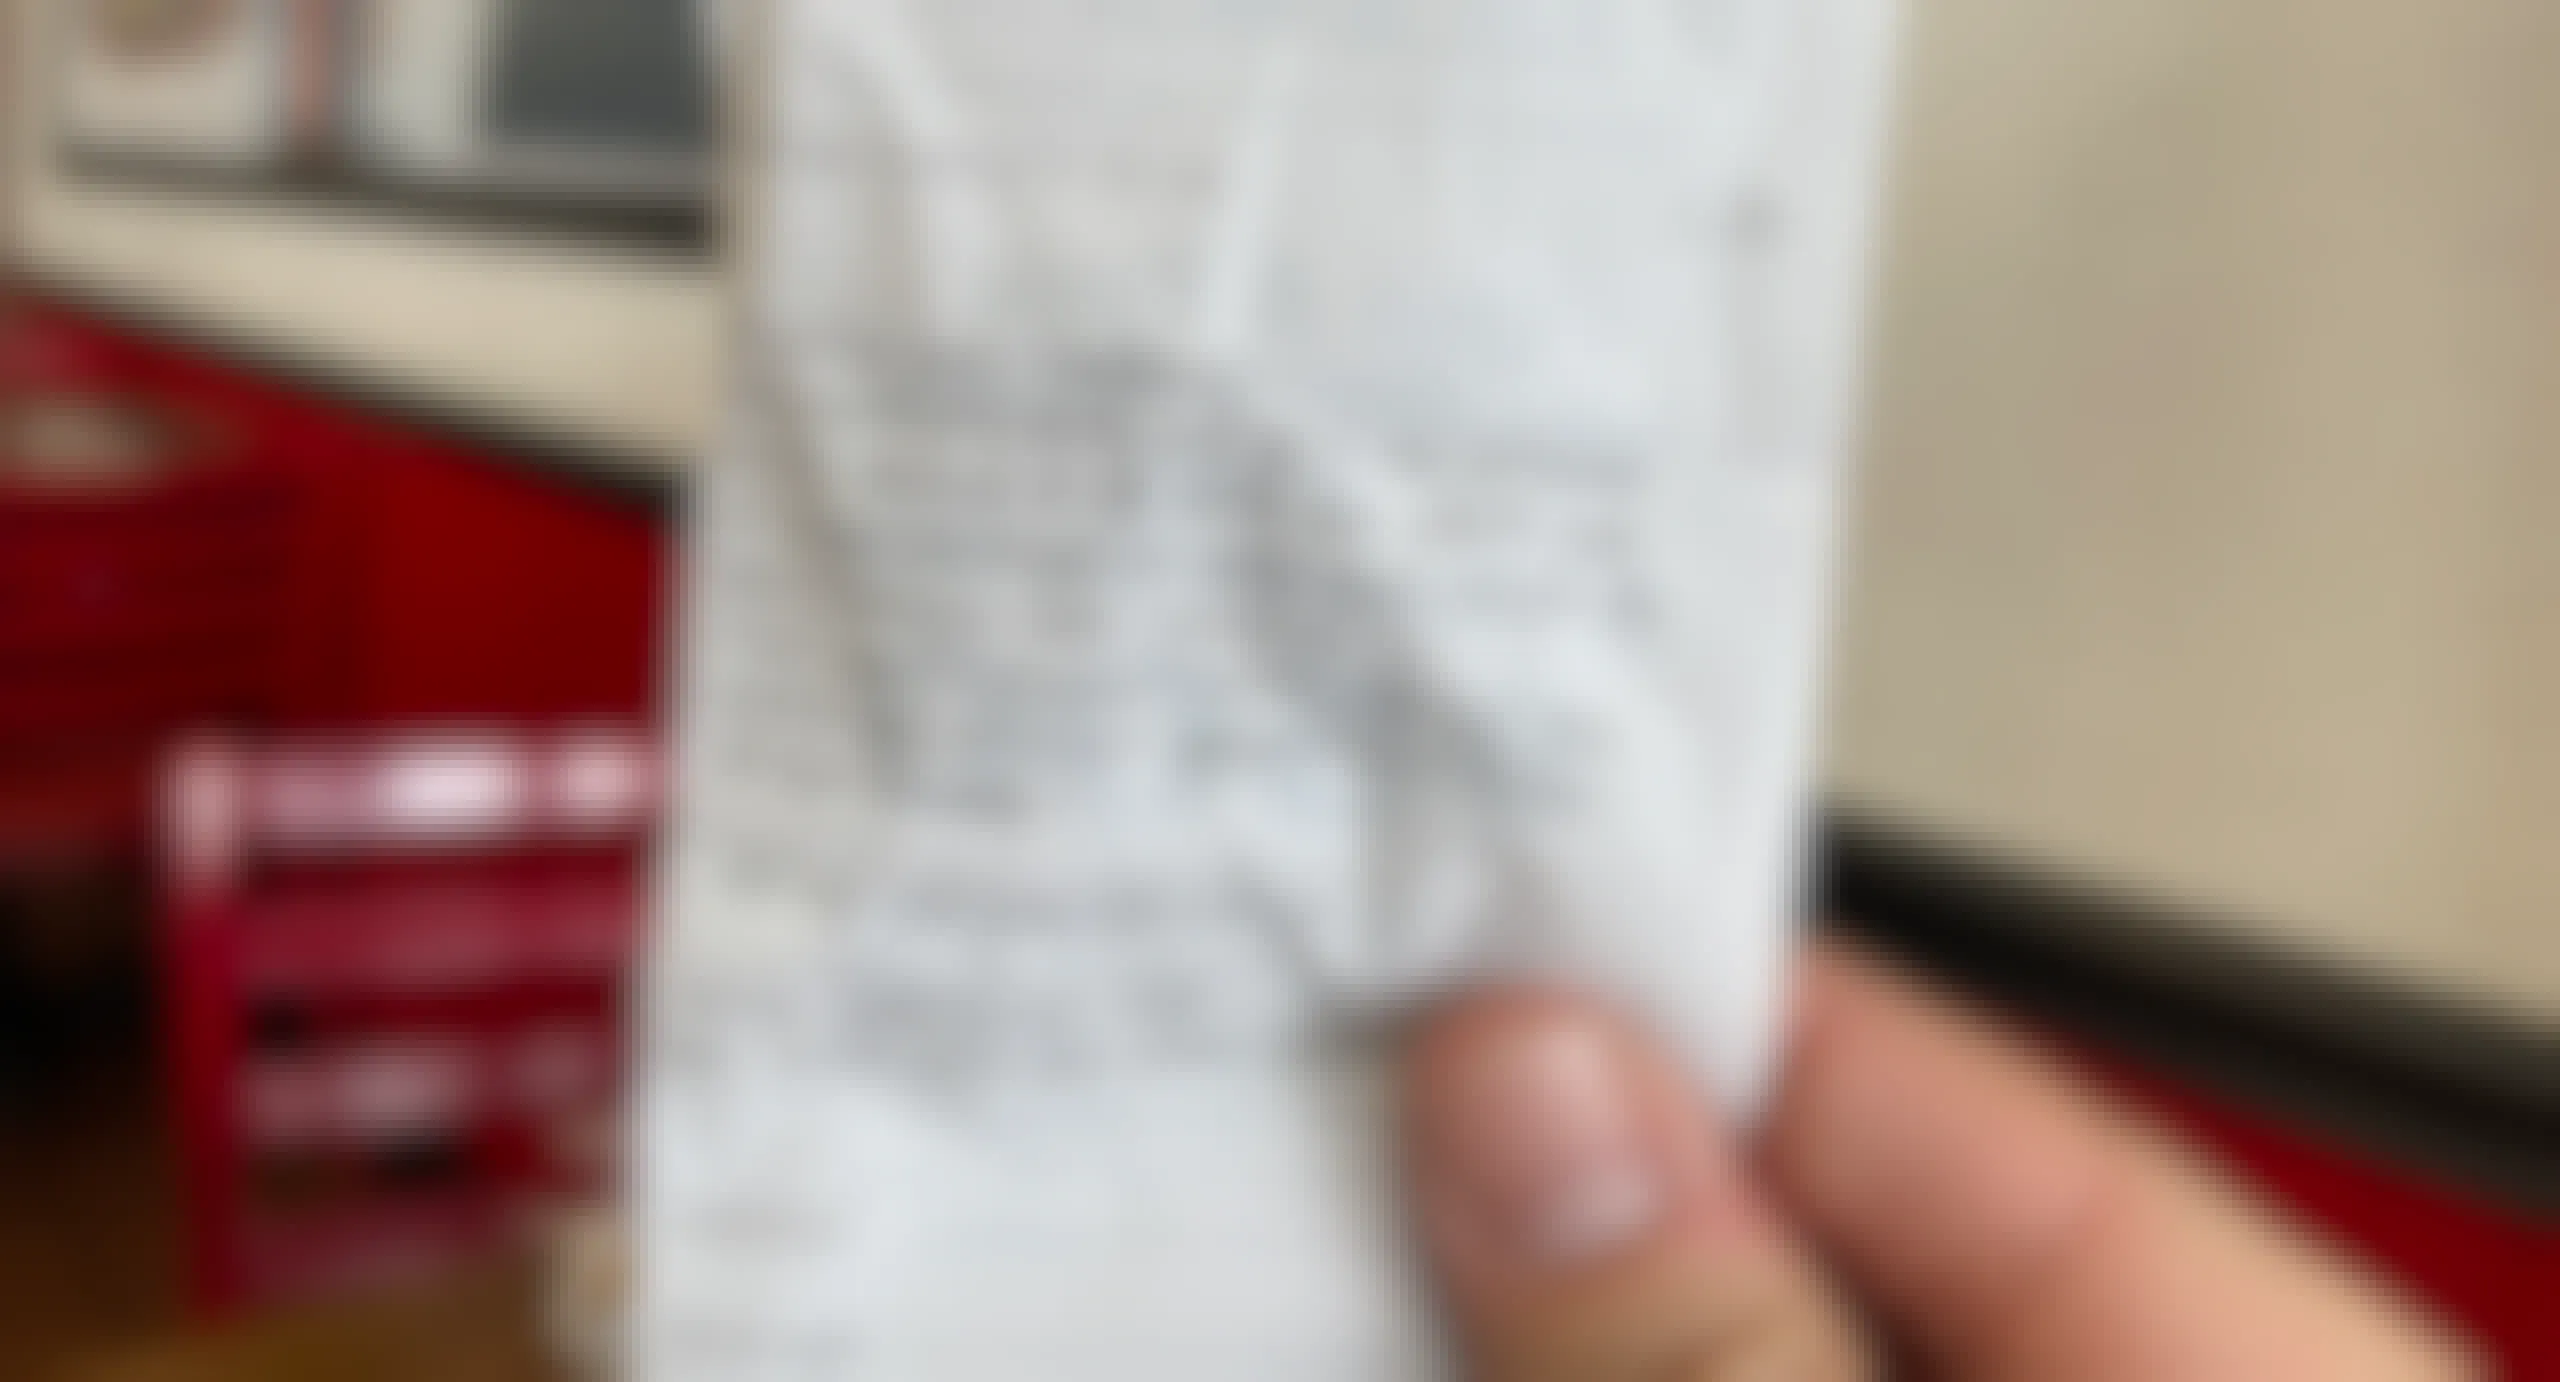 A person holding a Firehouse Subs receipt.